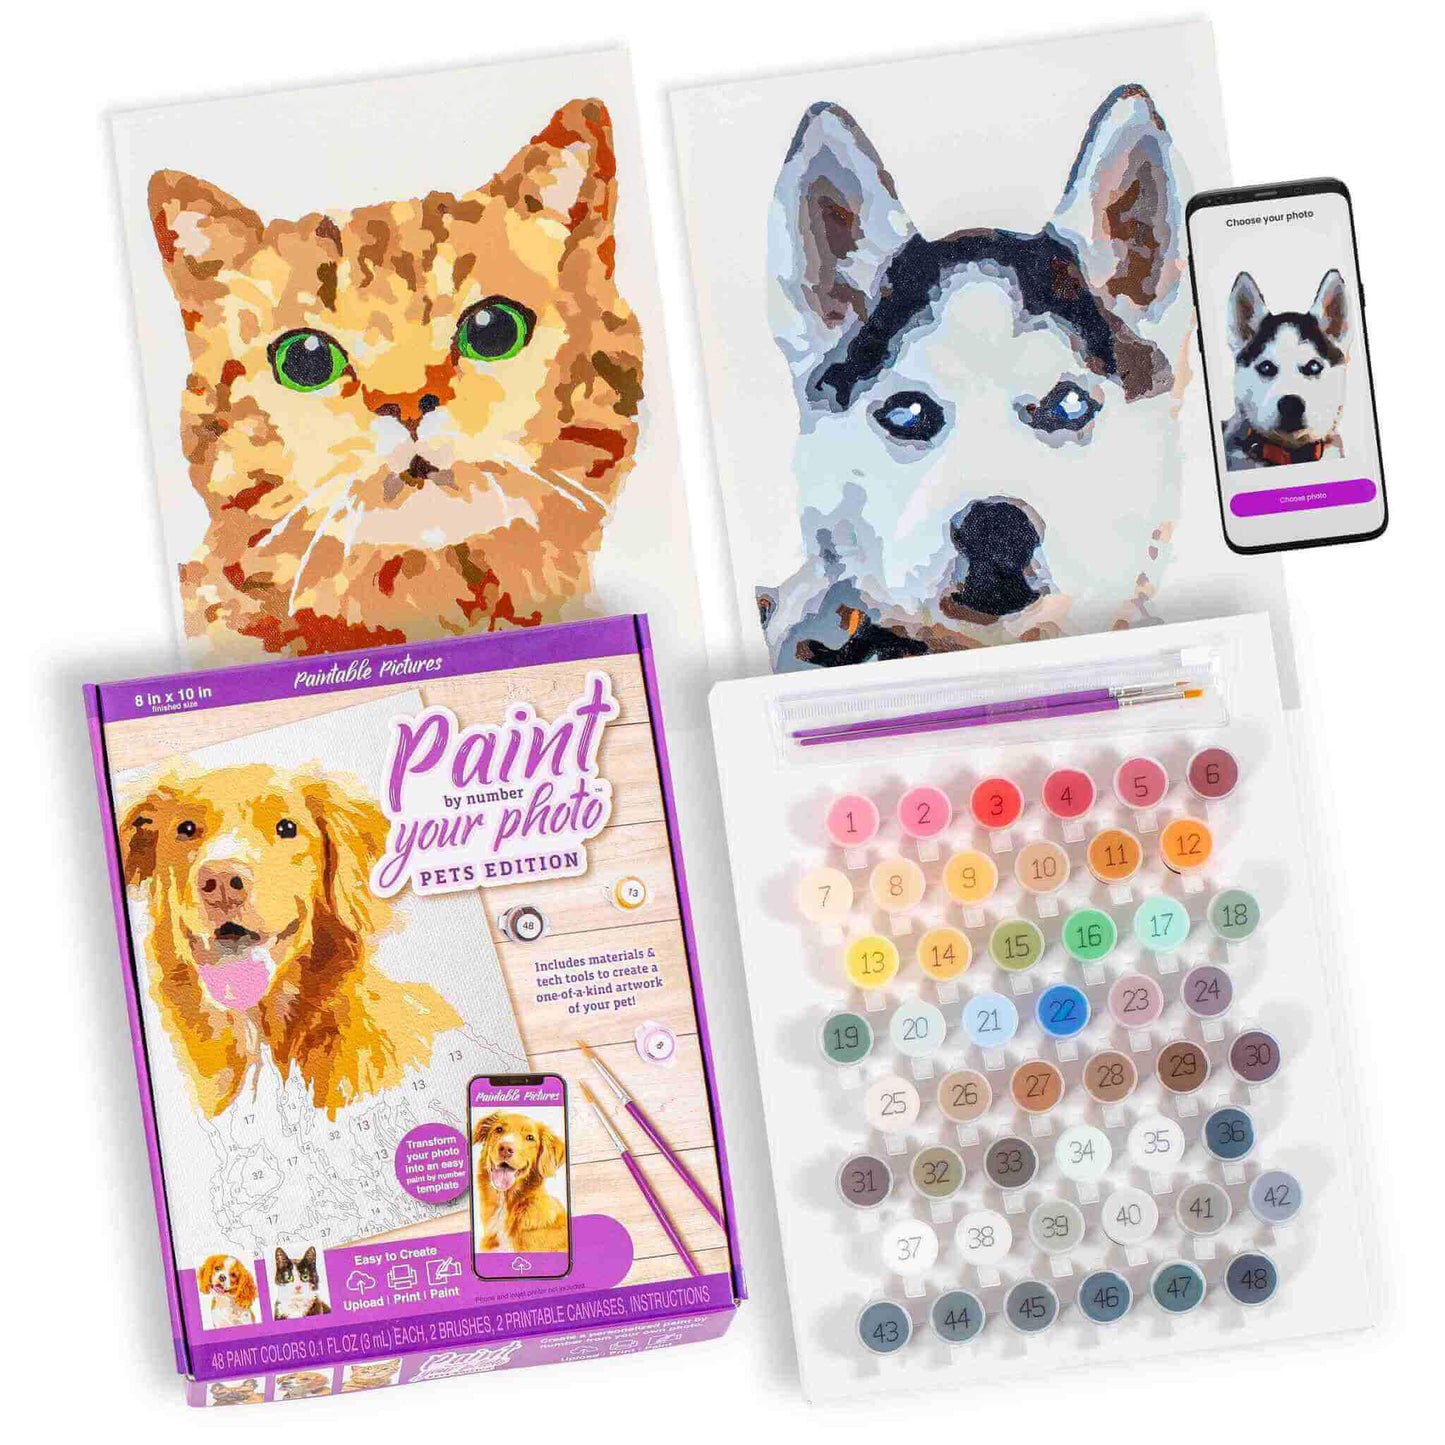 Two finished custom paint-by-number canvases: one of an orange cat with green eyes and another of a white and grey husky dog. Below, a product box titled 'Paint by number your photo: PETS EDITION', highlighting a golden retriever and kit contents. Adjacent is a set of numbered paint pots ranging from pastel to vibrant shades, along with brushes. To the right, a smartphone showcases the husky image with an option to 'Choose your photo'.